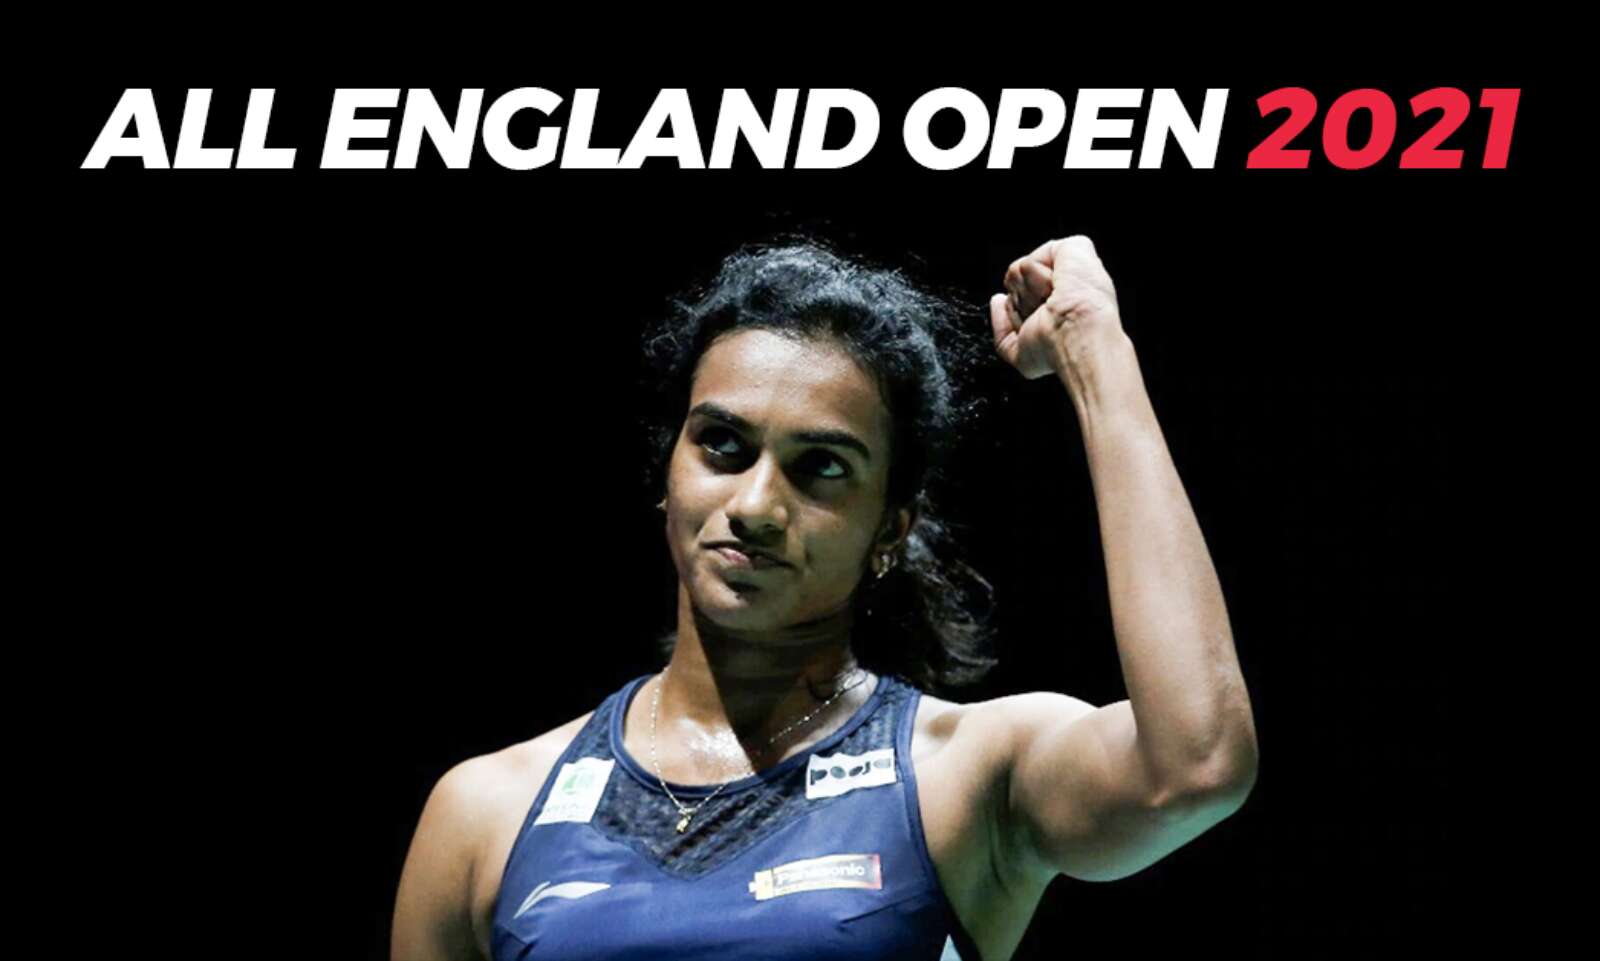 Badminton Live Score — All England Open 2021 LIVE Updates PV Sindhu reaches All England semi-finals, beats Akane Yamaguchi in three games